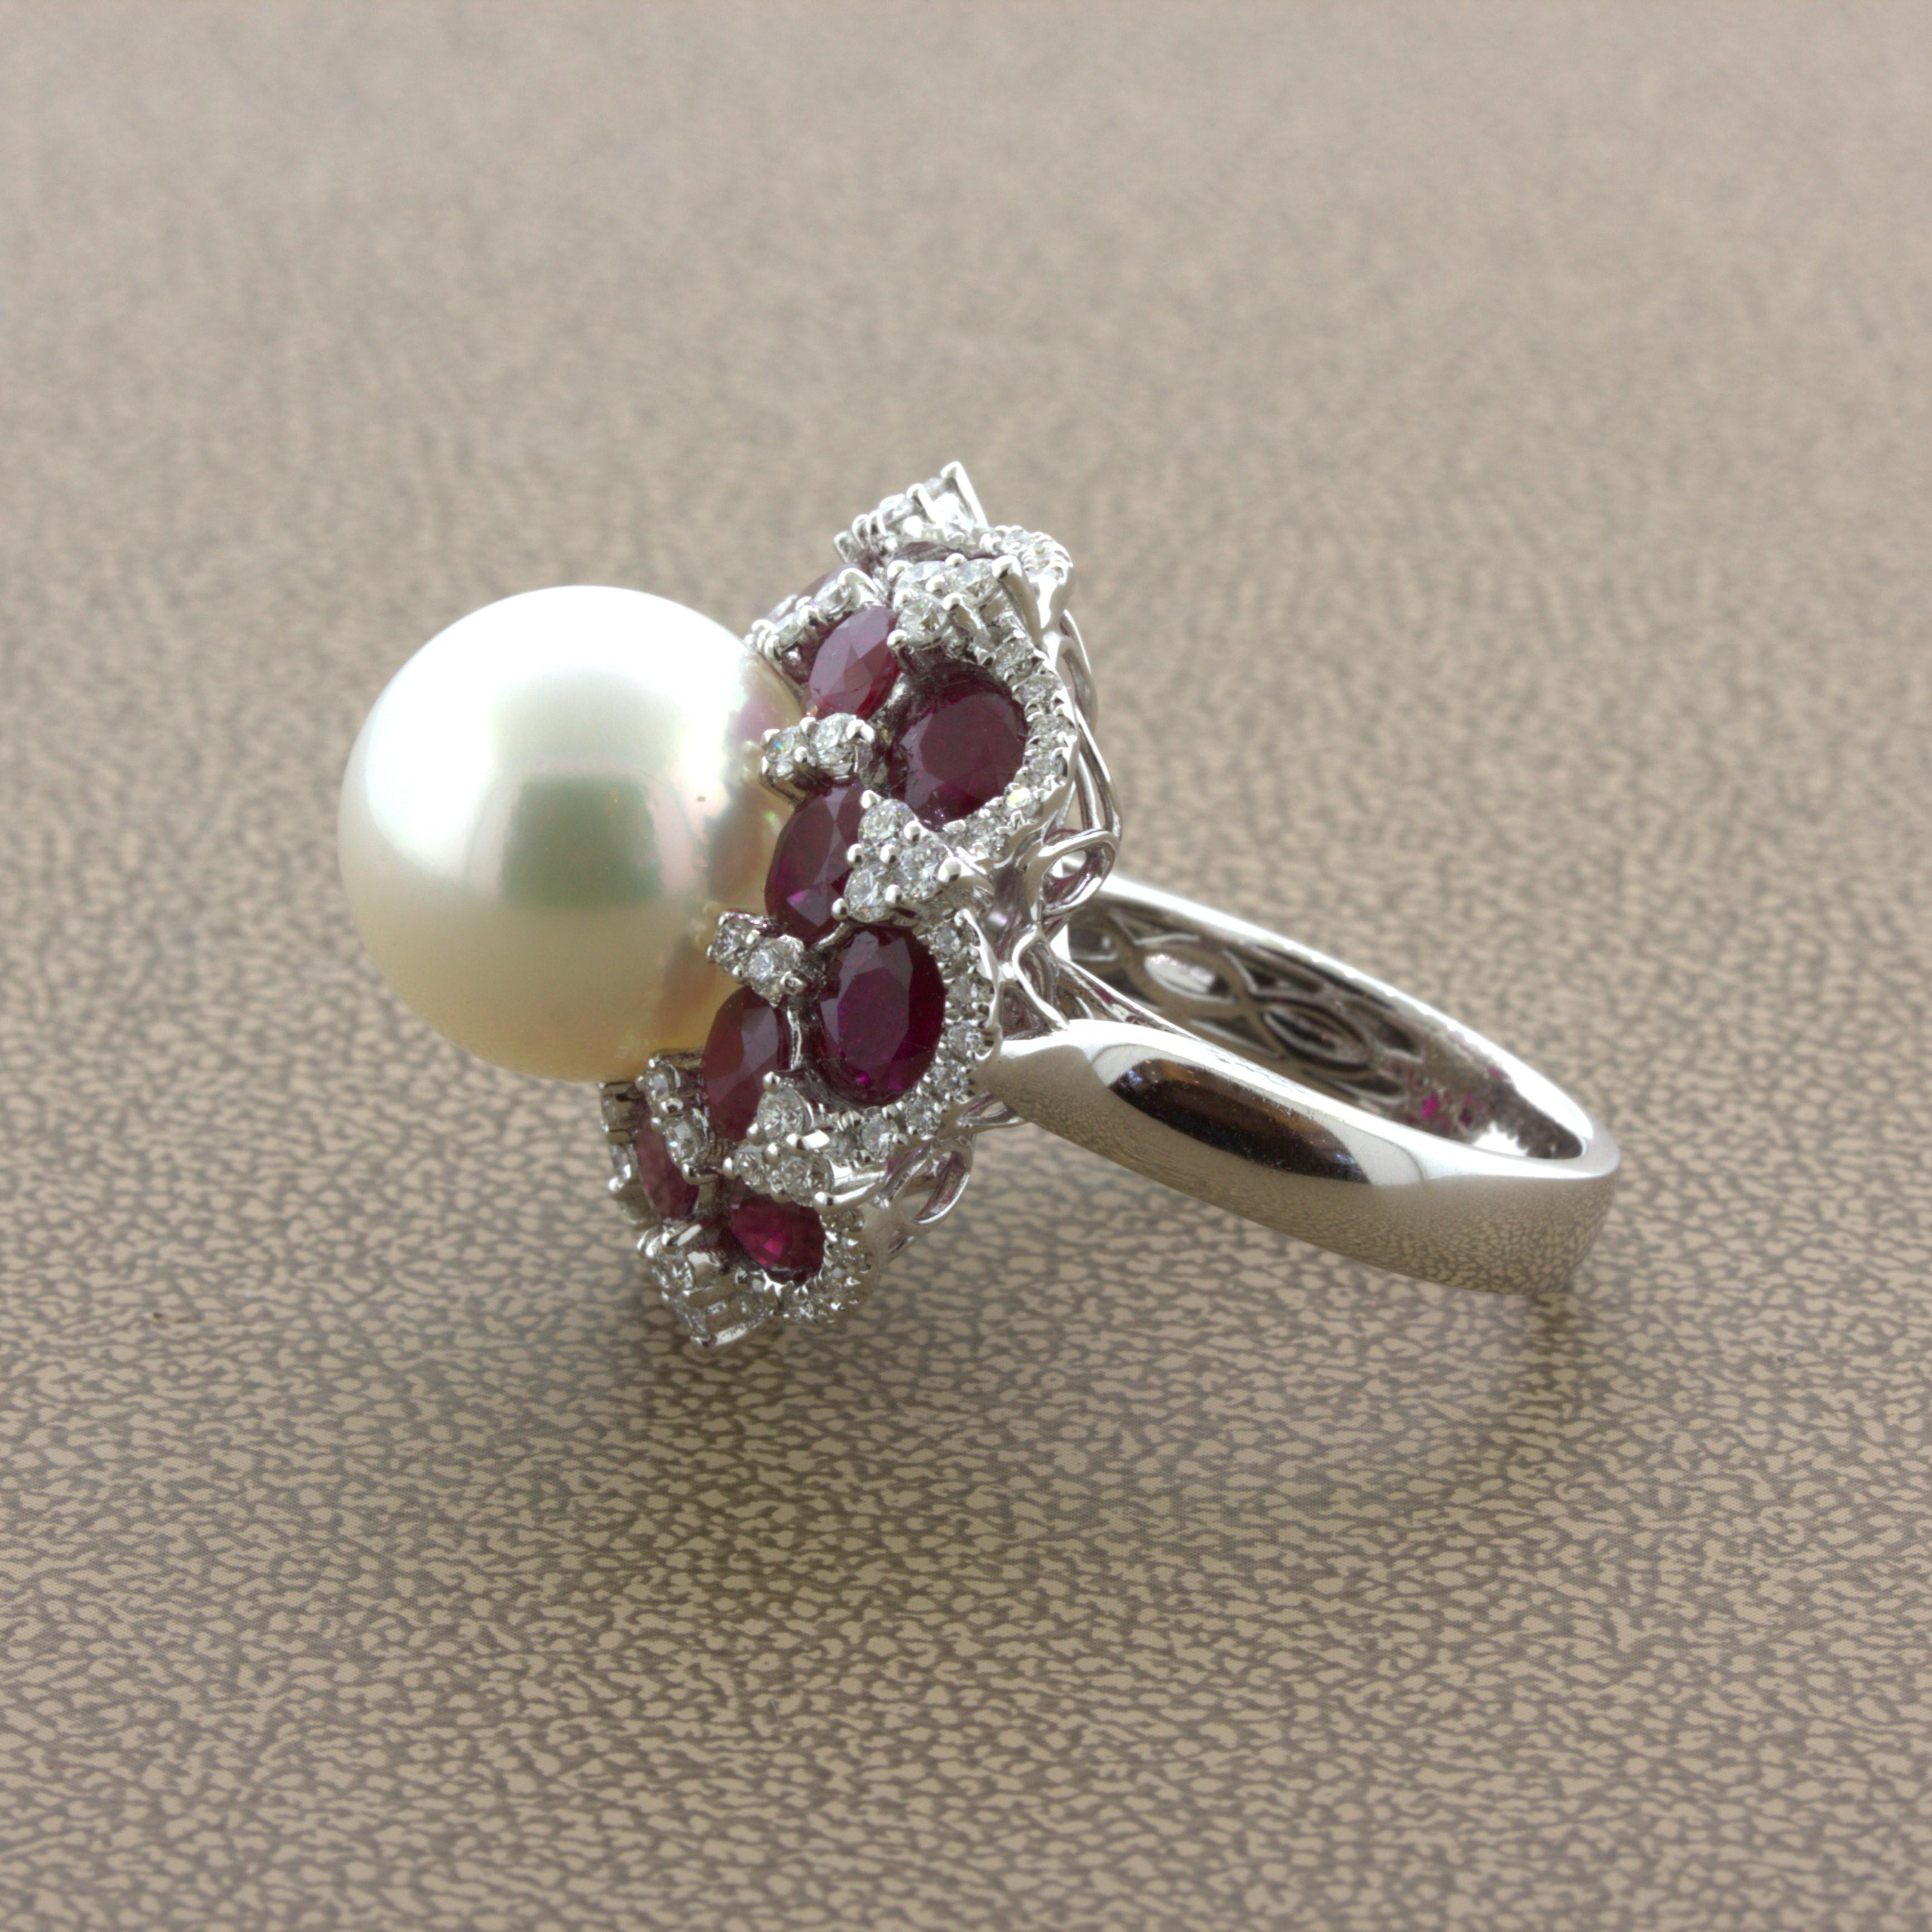 15mm South Sea Pearl Ruby Diamond 18k White Gold Cocktail Ring For Sale 2